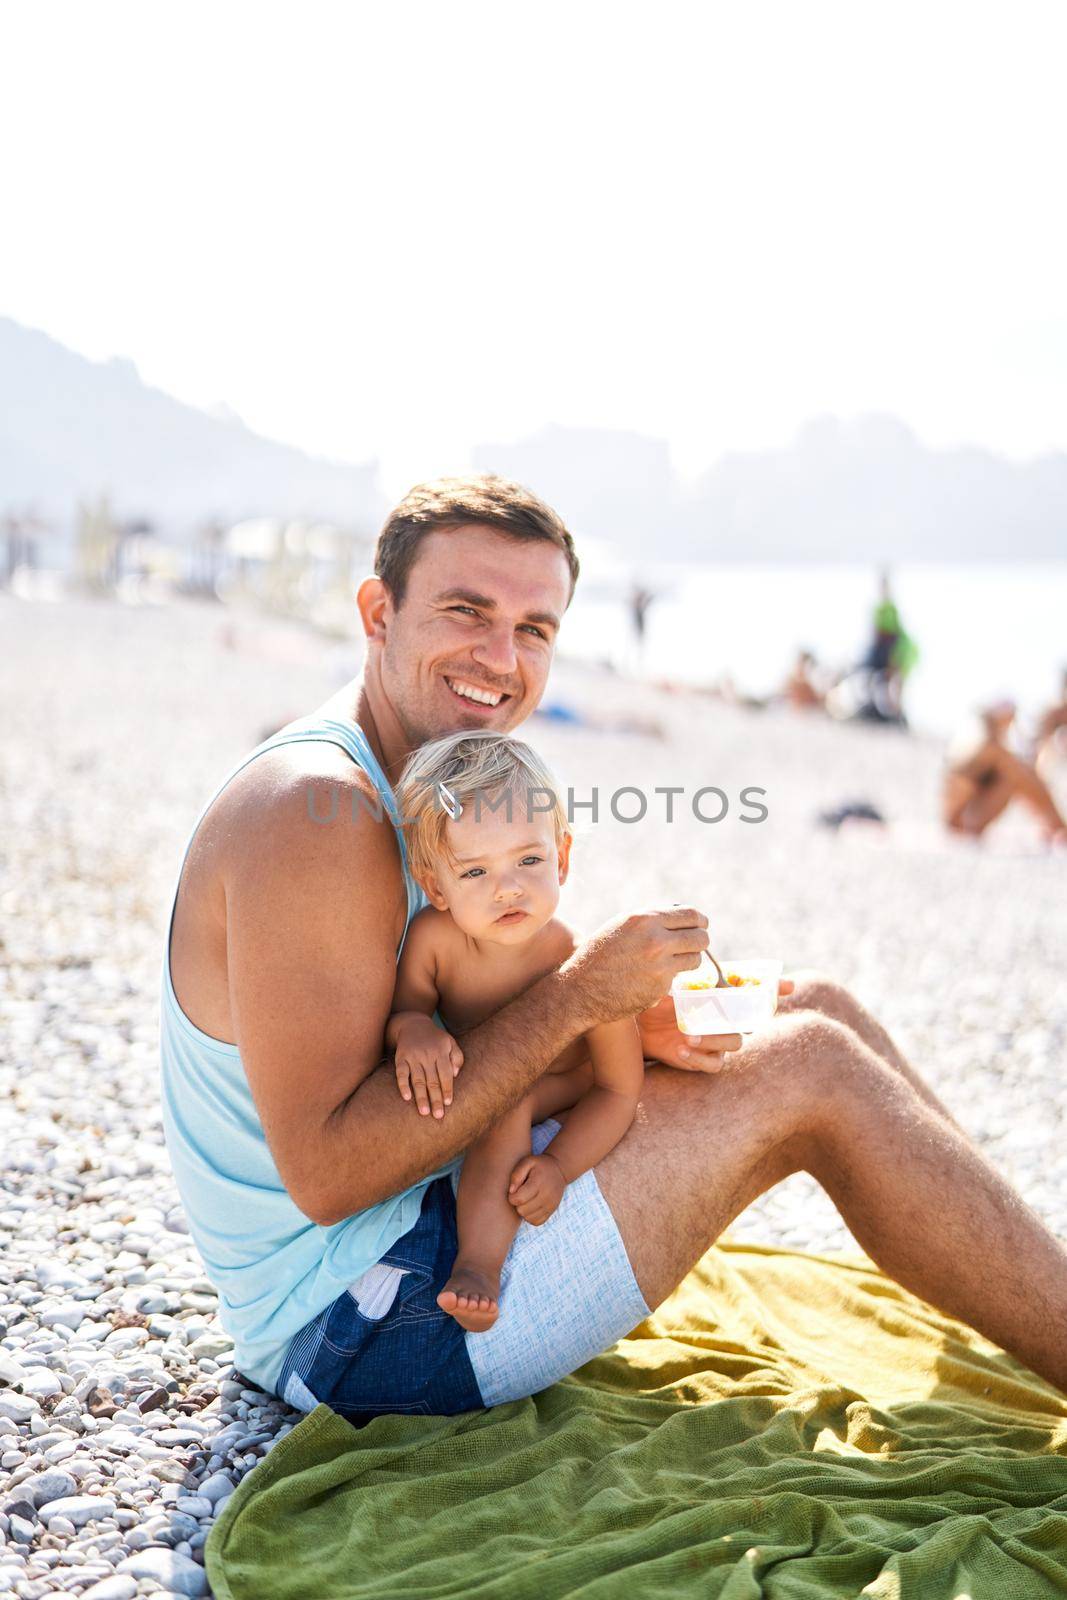 Smiling dad feeding his little daughter on the beach. High quality photo